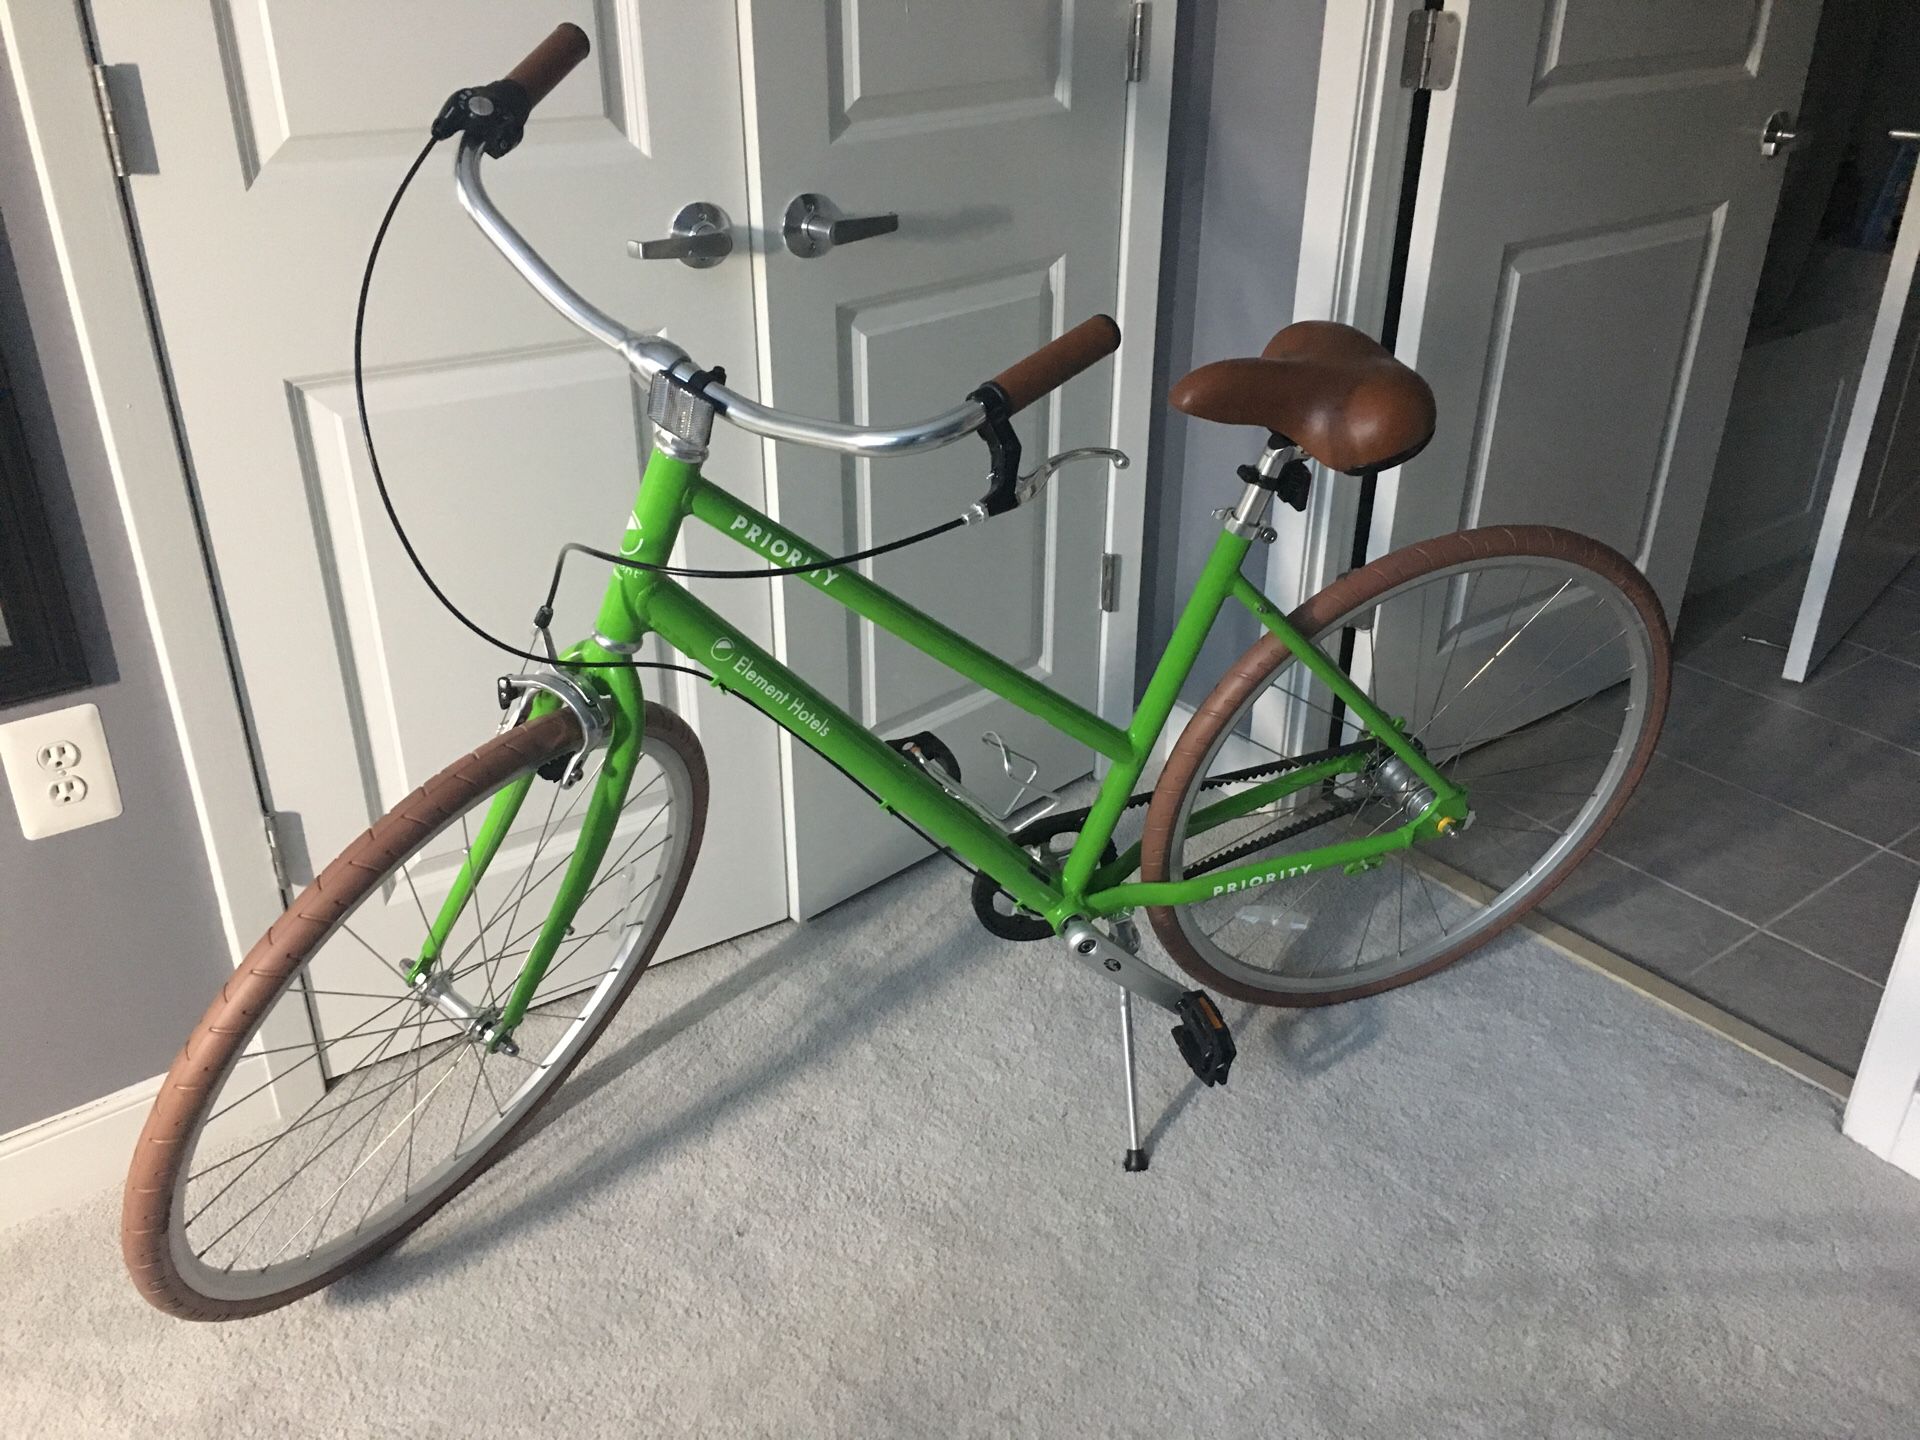 Priority Bicycle — Brand New, Never ridden